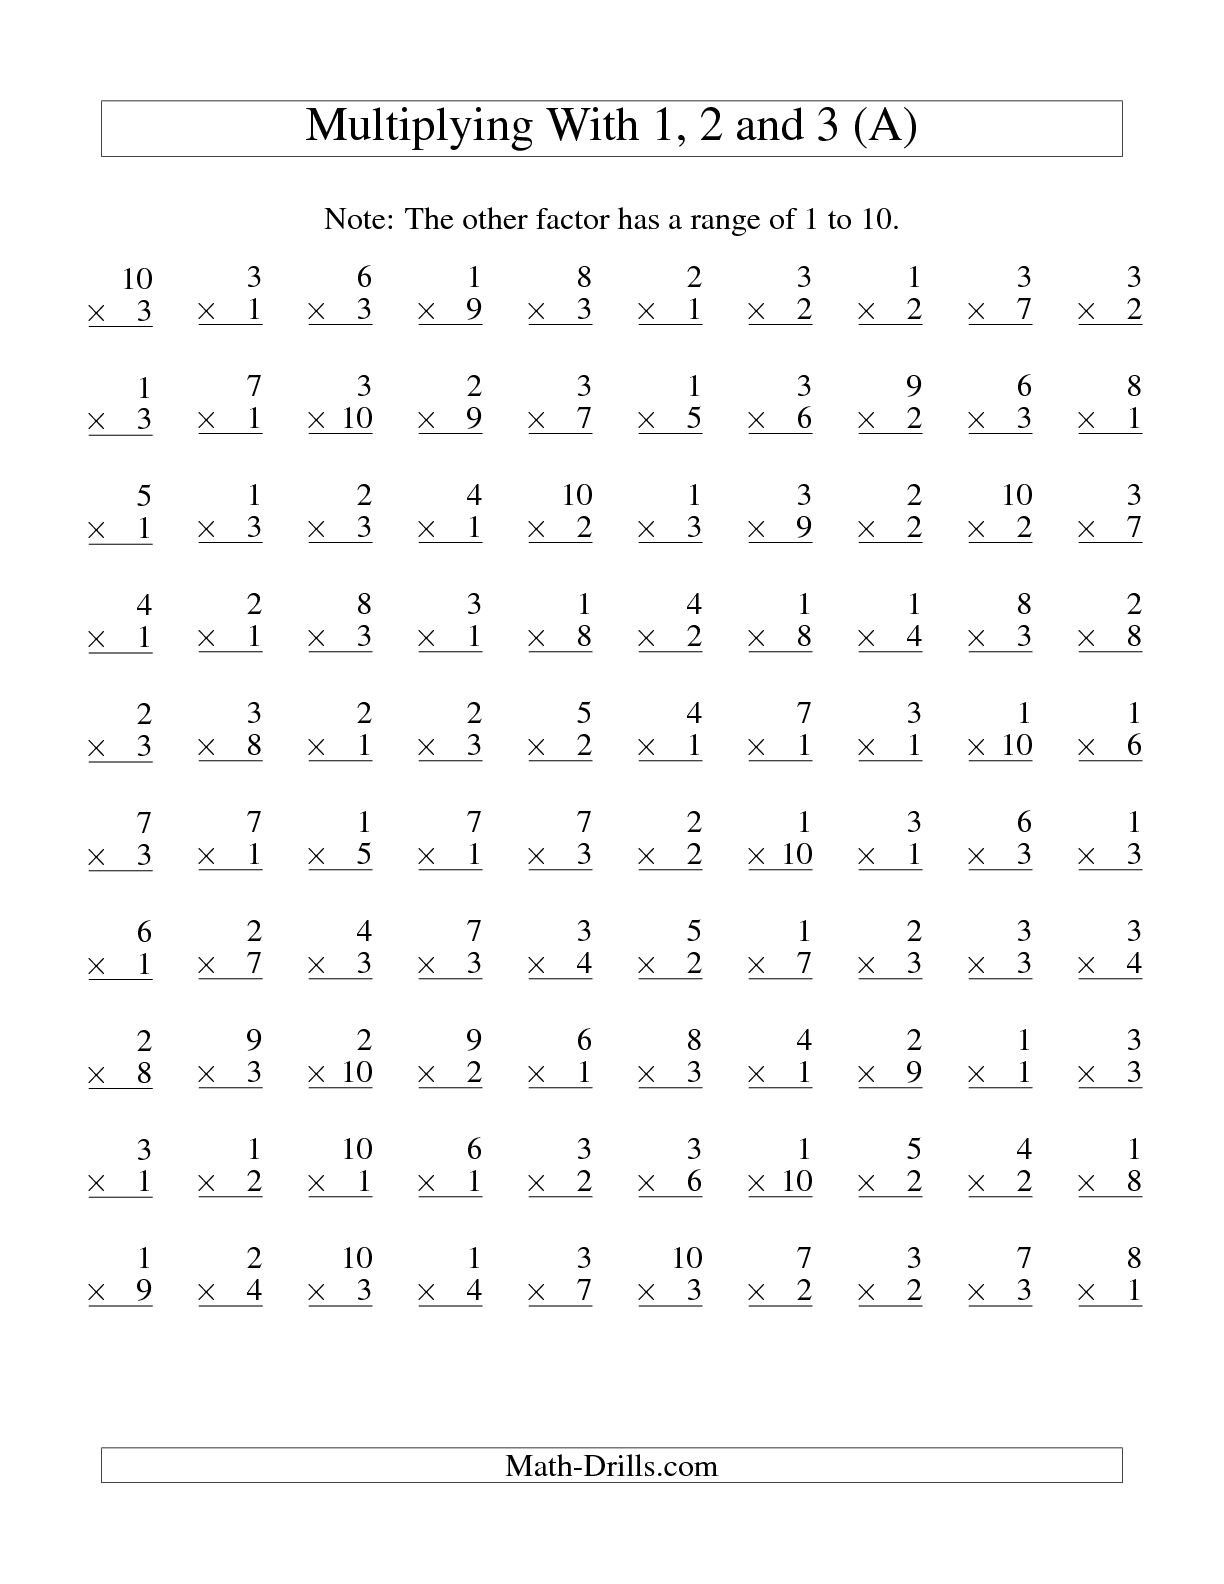 Times Tables Worksheet Hard Inspirationa Collection Of inside Multiplication Worksheets 2 And 3